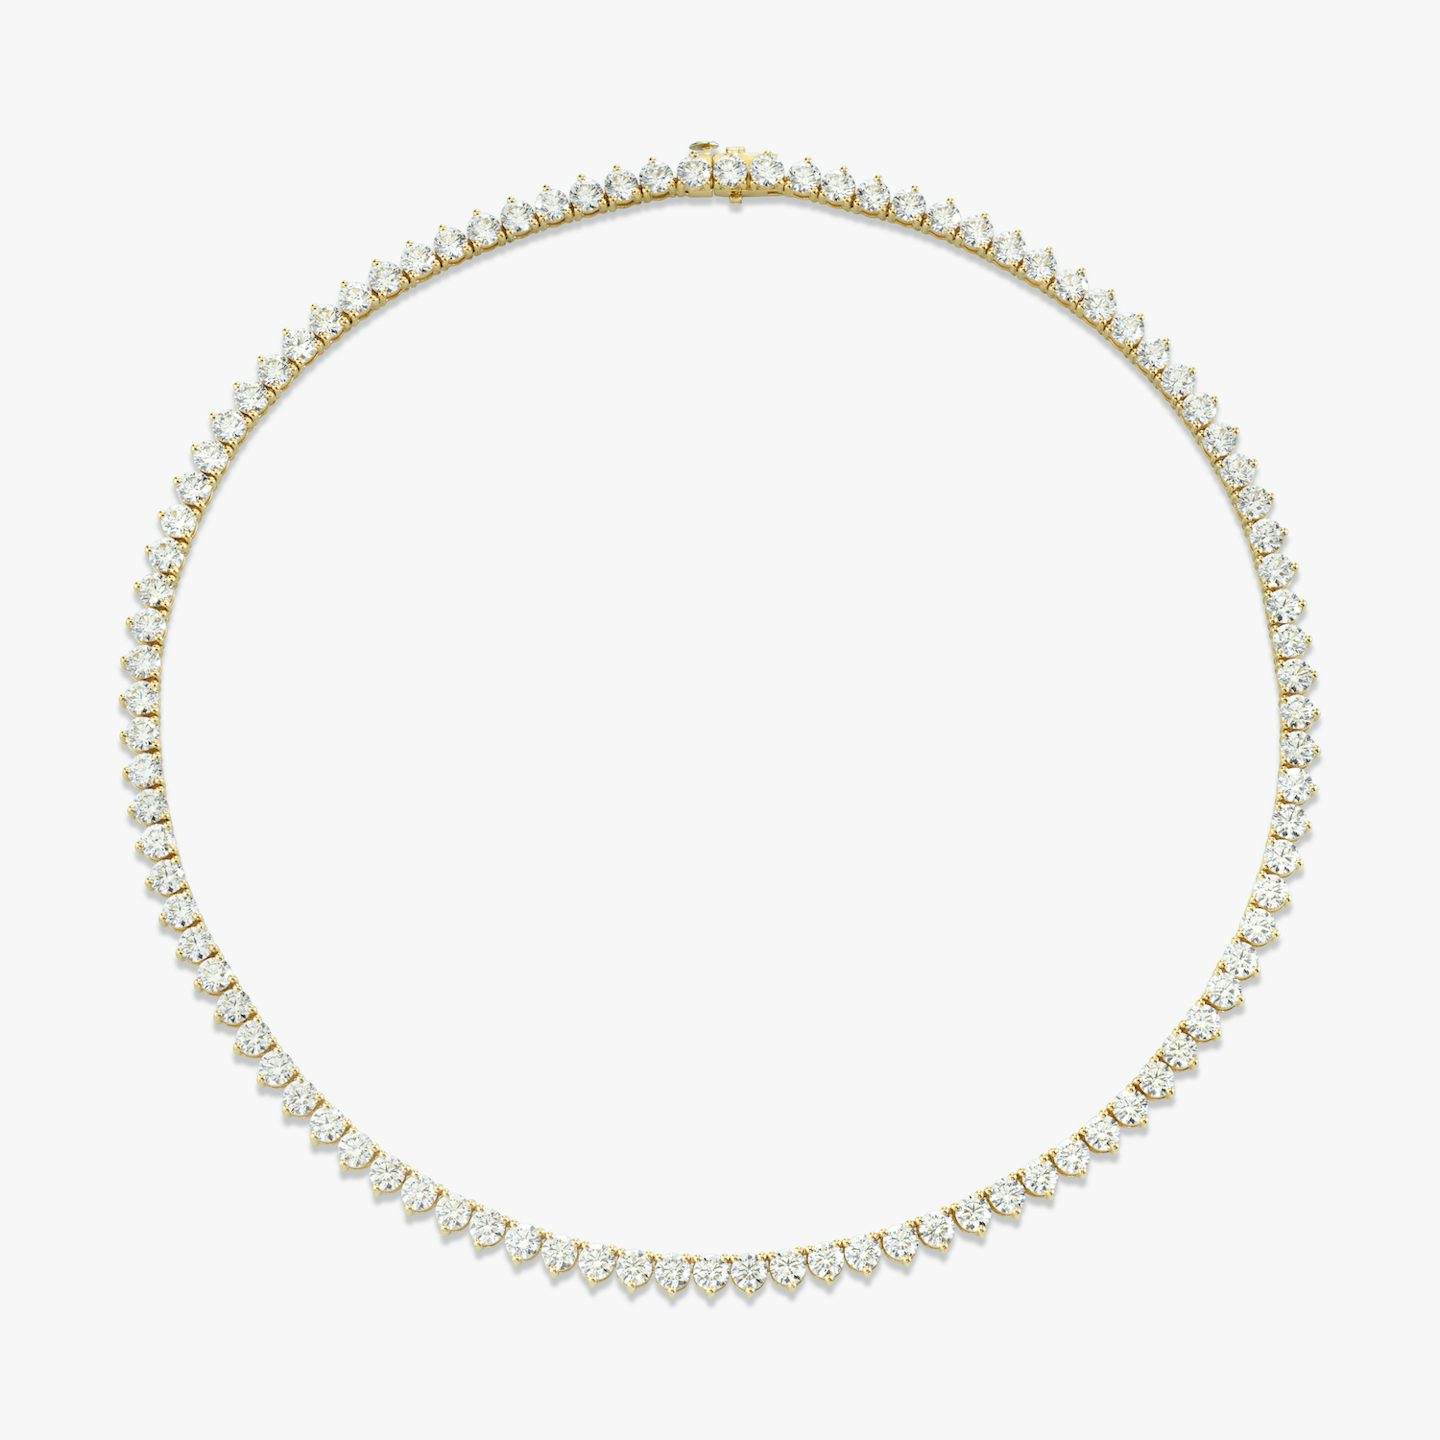 Tennis Necklace | Round Brilliant | 14k | 18k Yellow Gold | Diamond size: Large | Chain length: 15